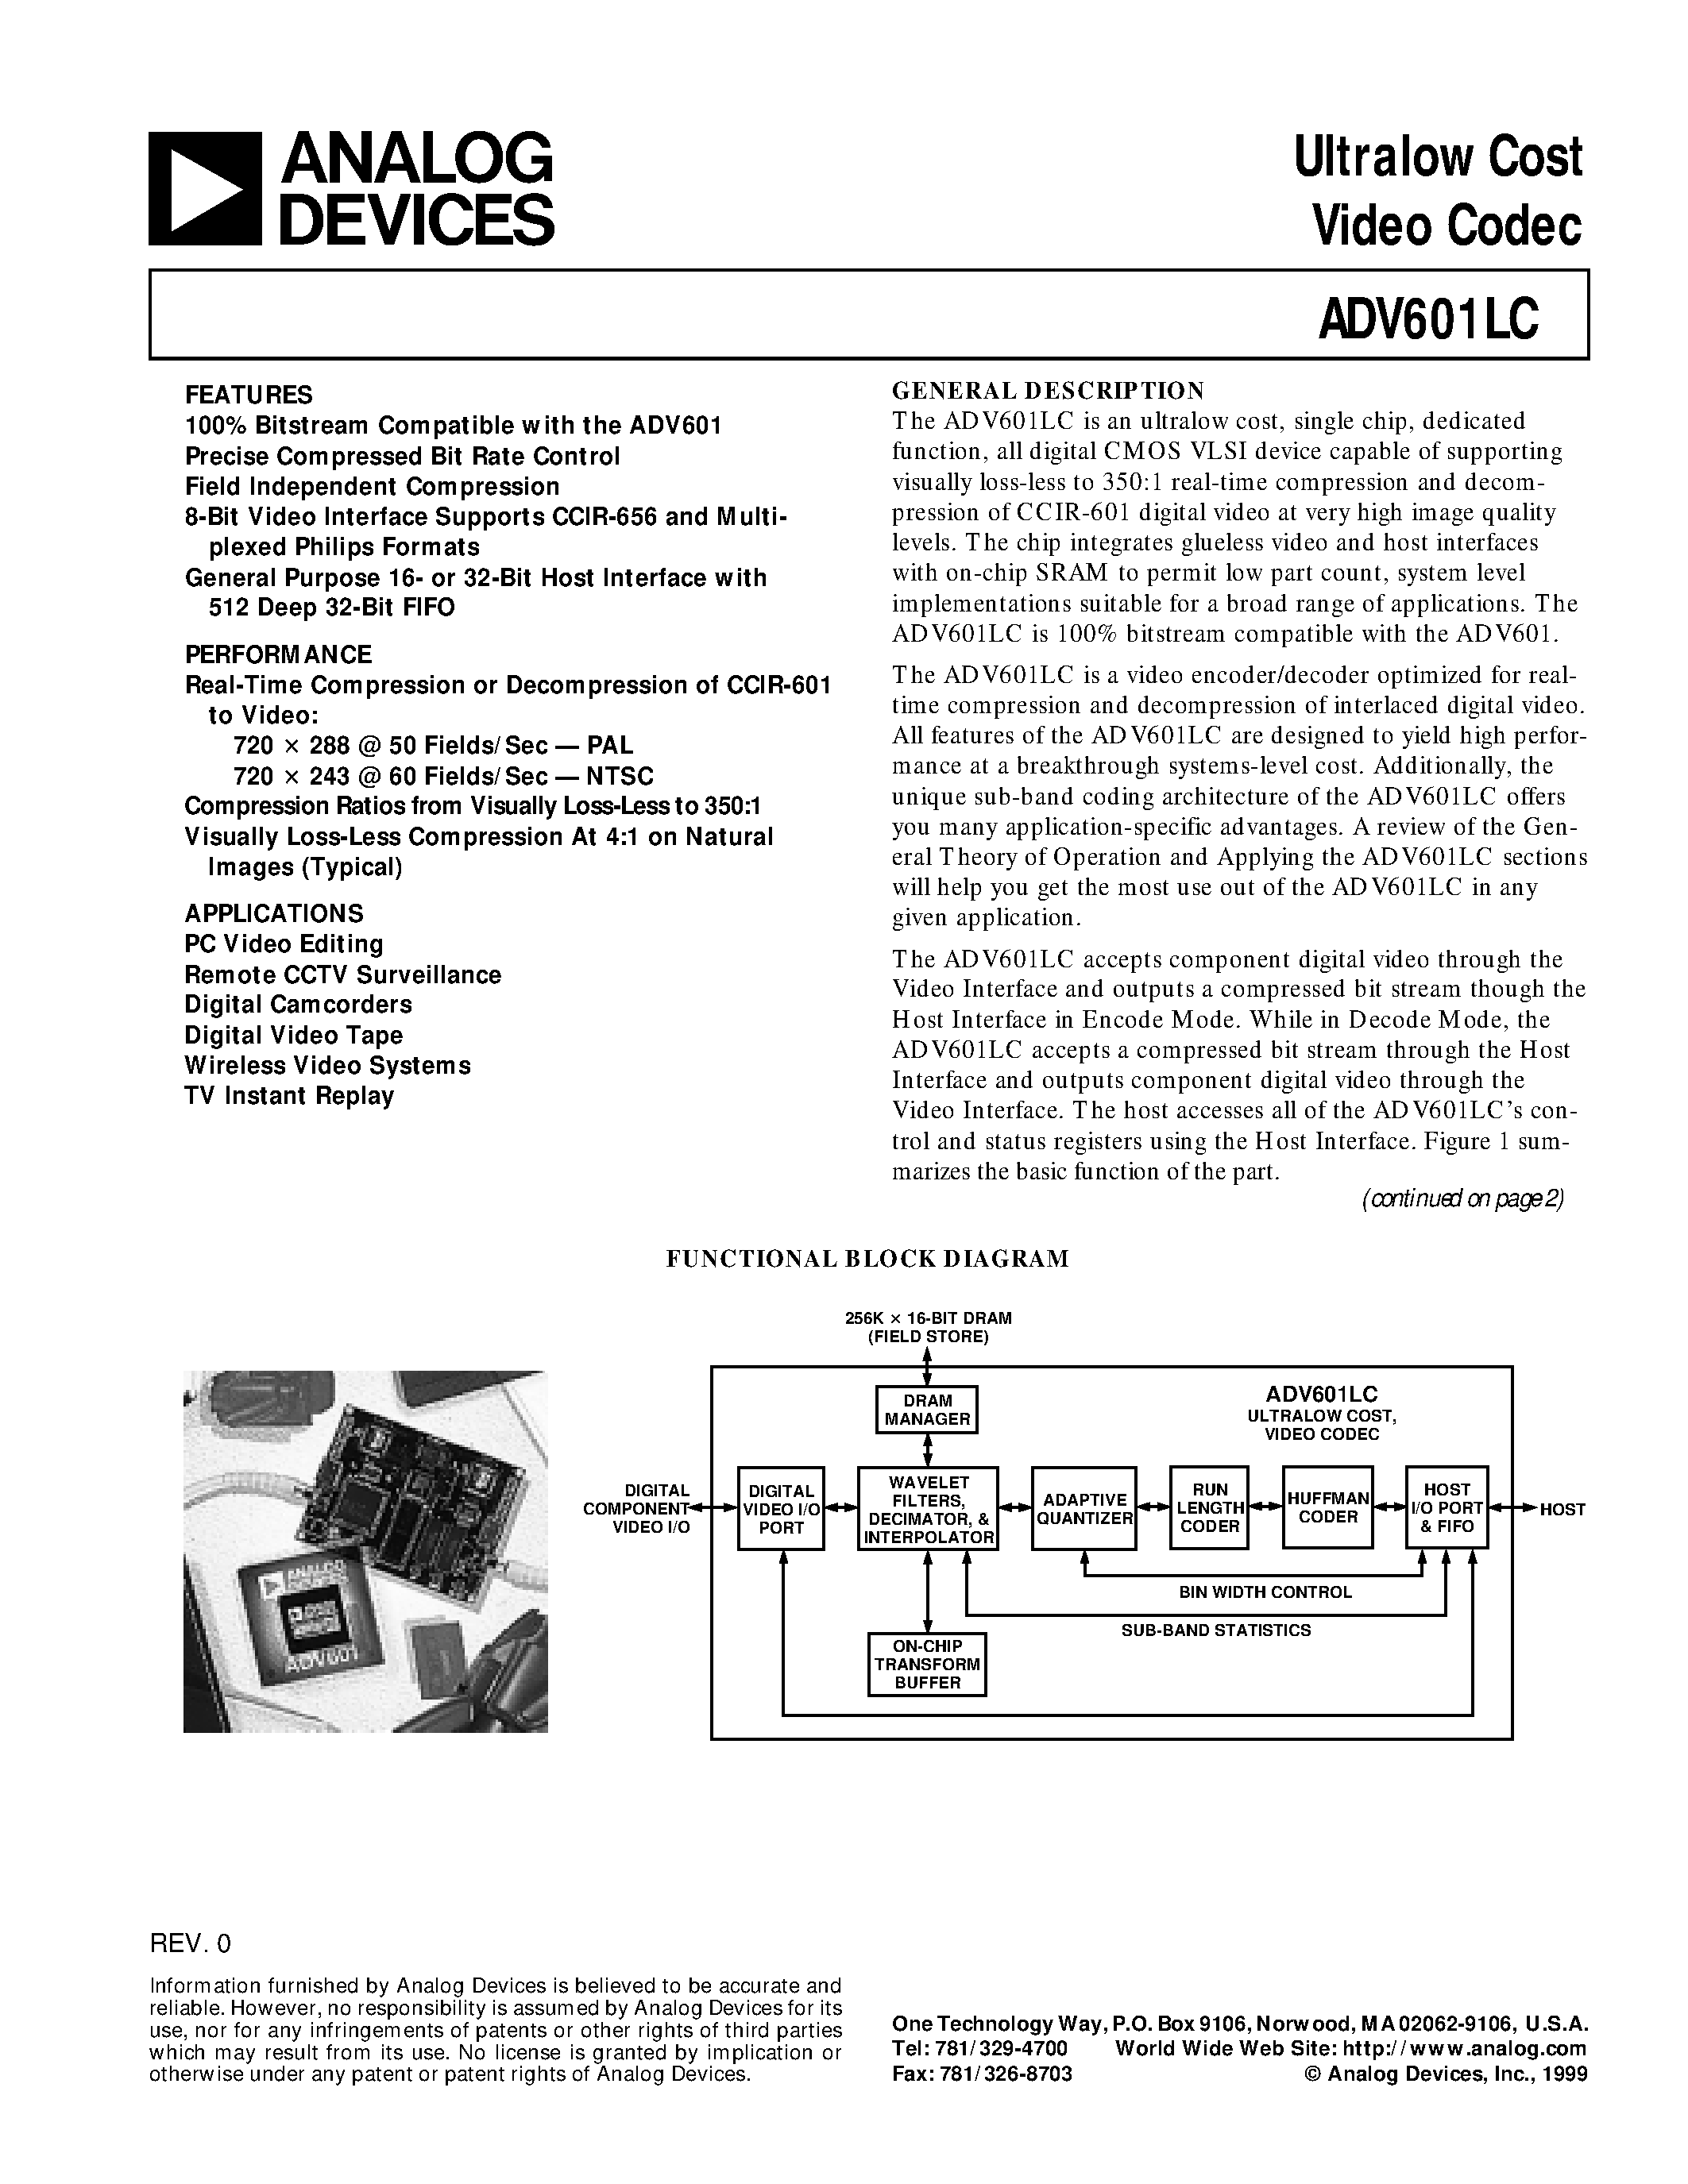 Datasheet ADV601LCJST - Ultralow Cost Video Codec page 1